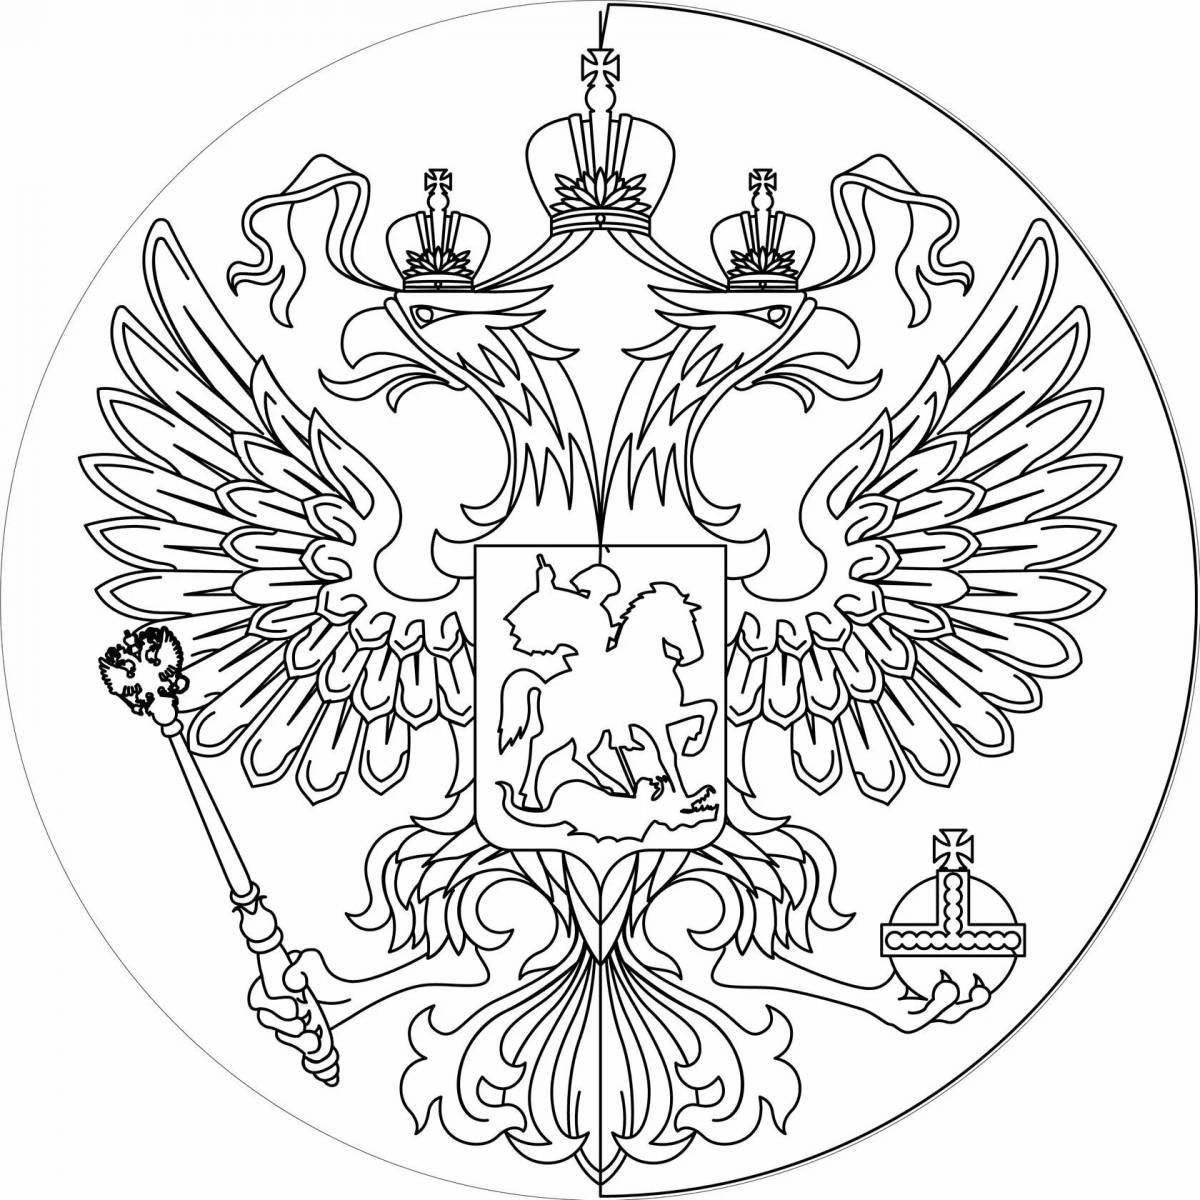 Double-headed eagle coloring page